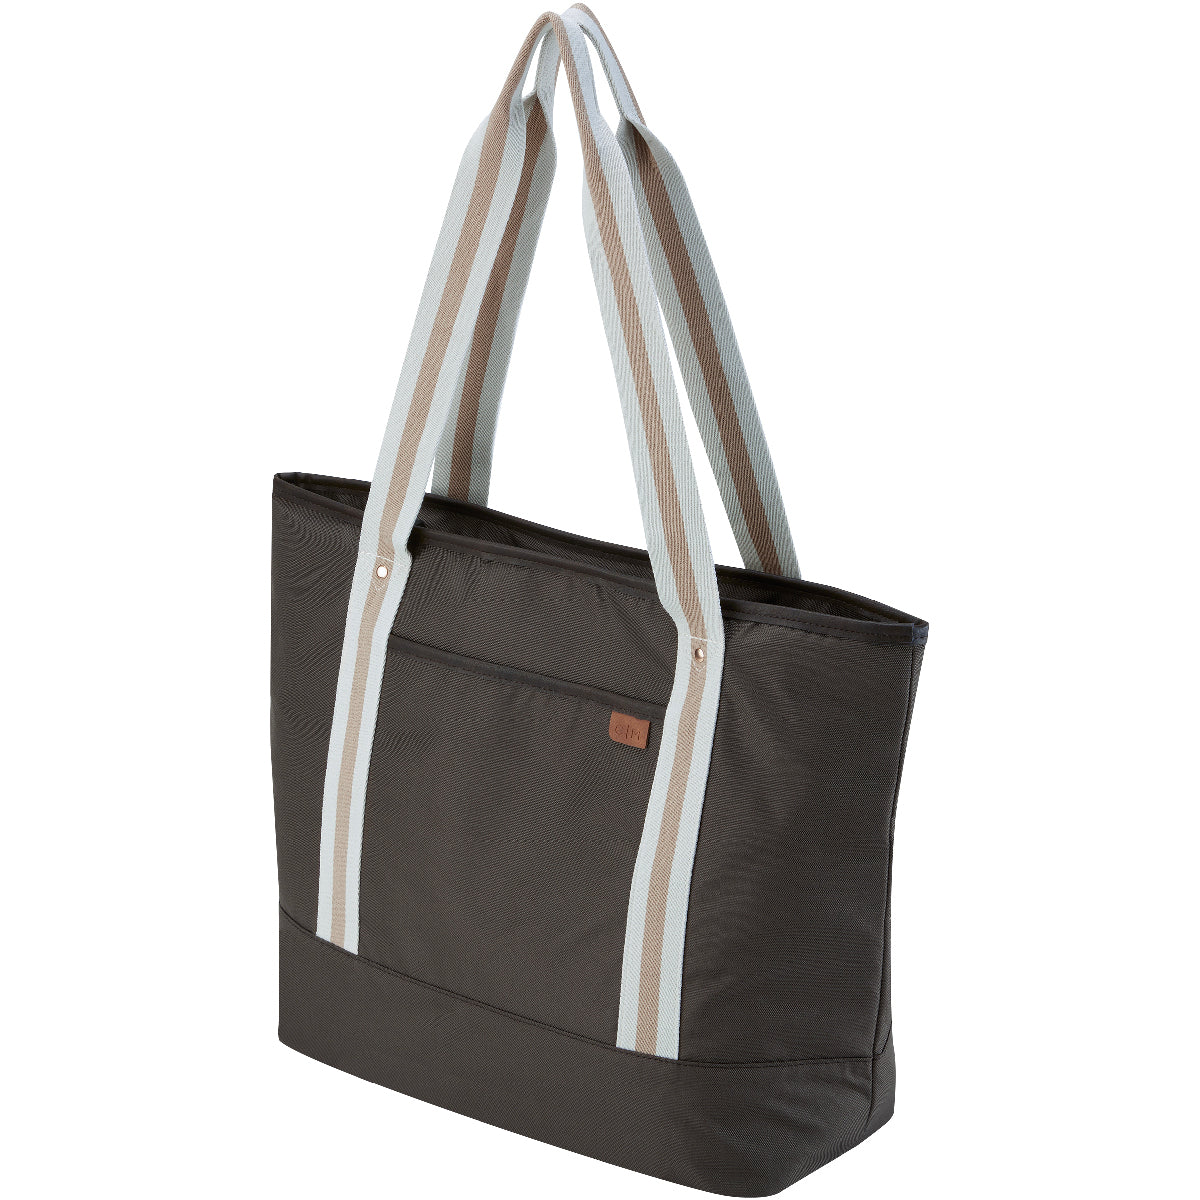 Clevermade Premium Malibu Tote Bag with Laptop Compartment - Carob